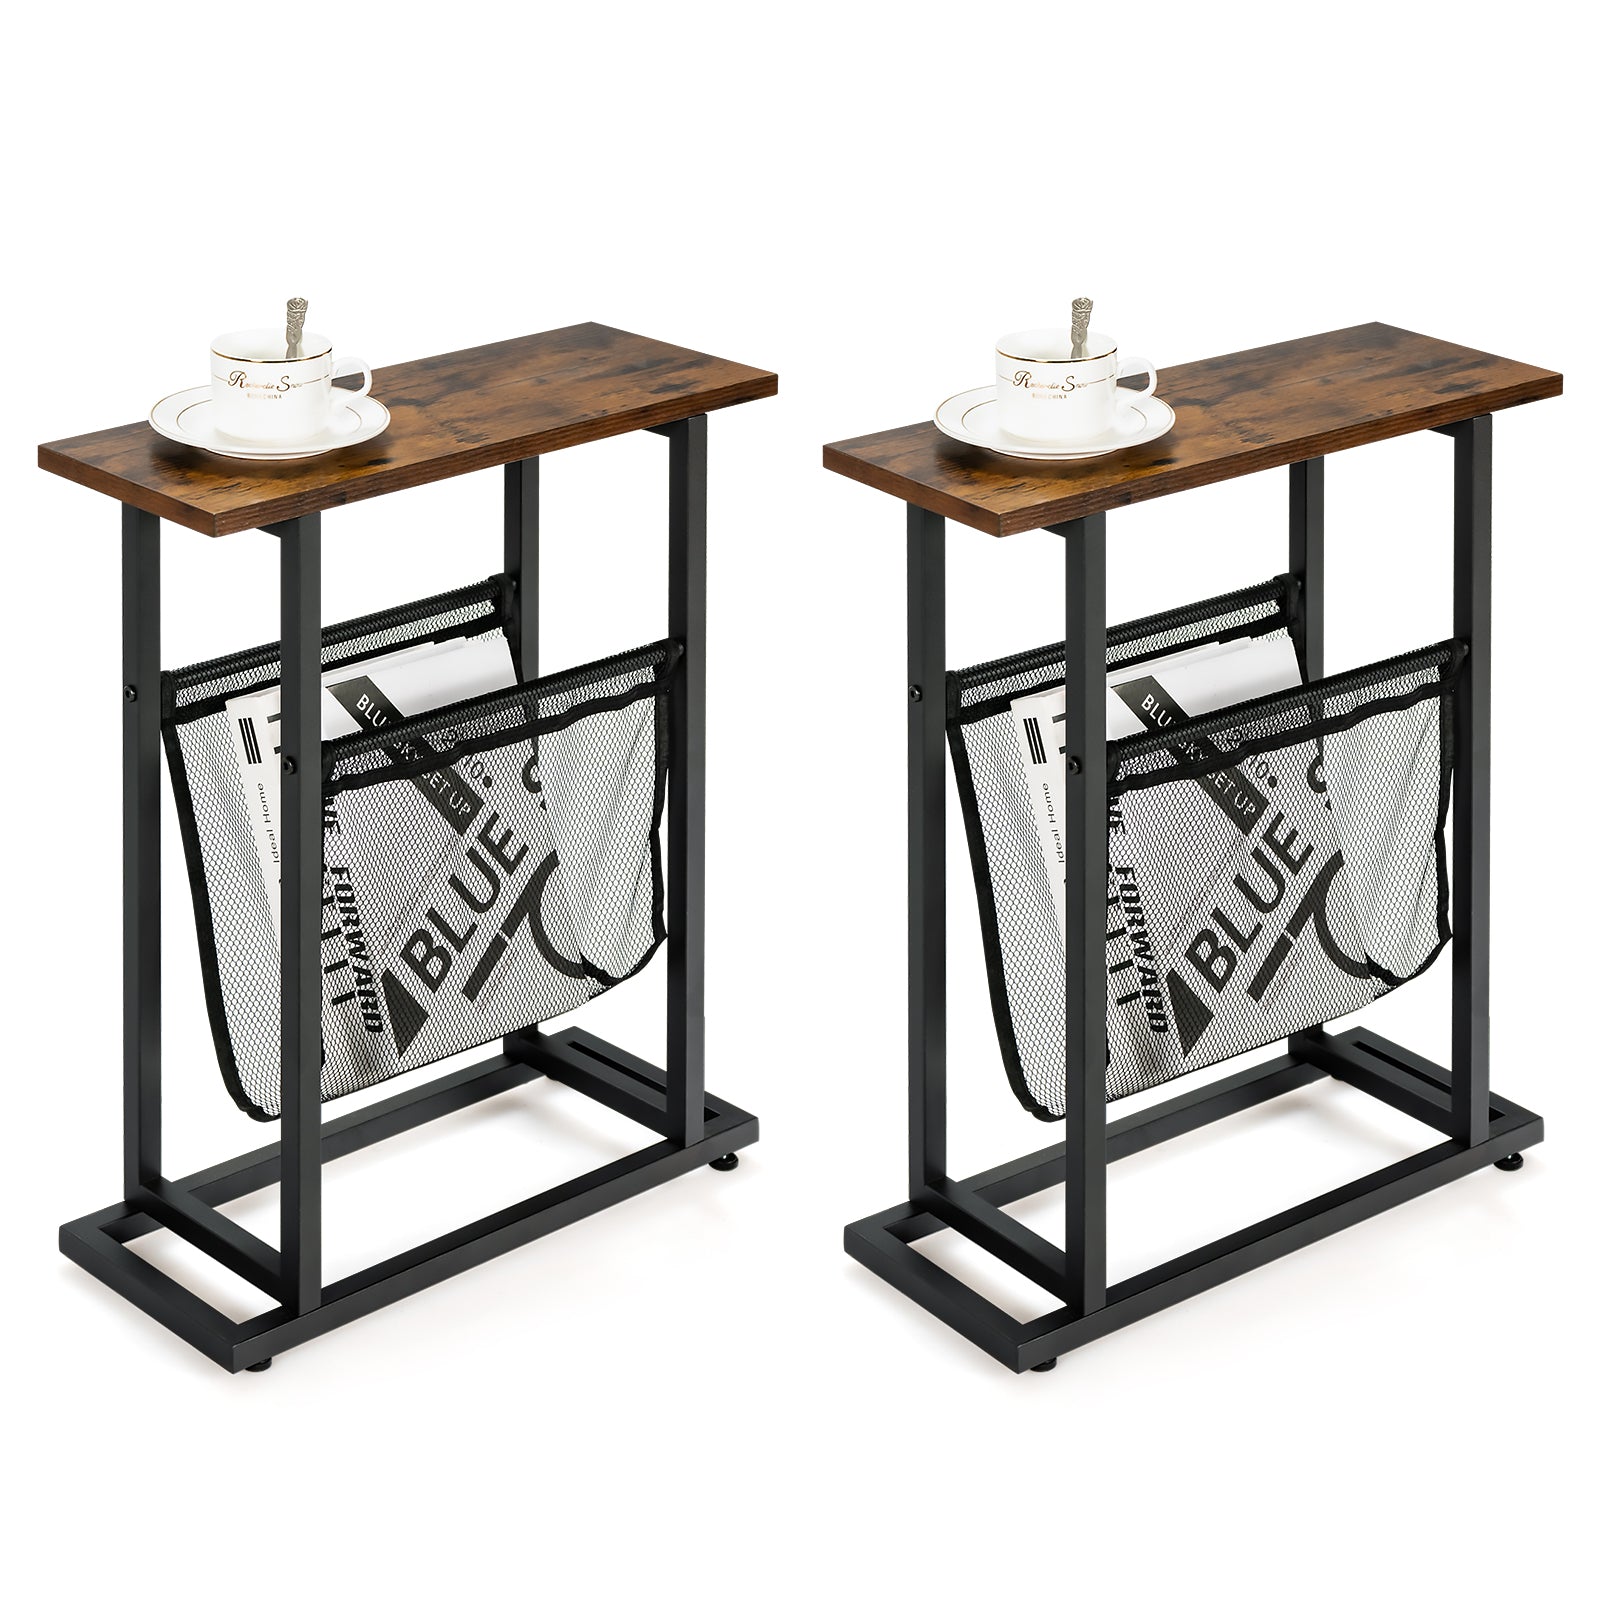 Giantex Industrial Side Table, Accent Sofa Side Table for Living Room Bedroom Furniture